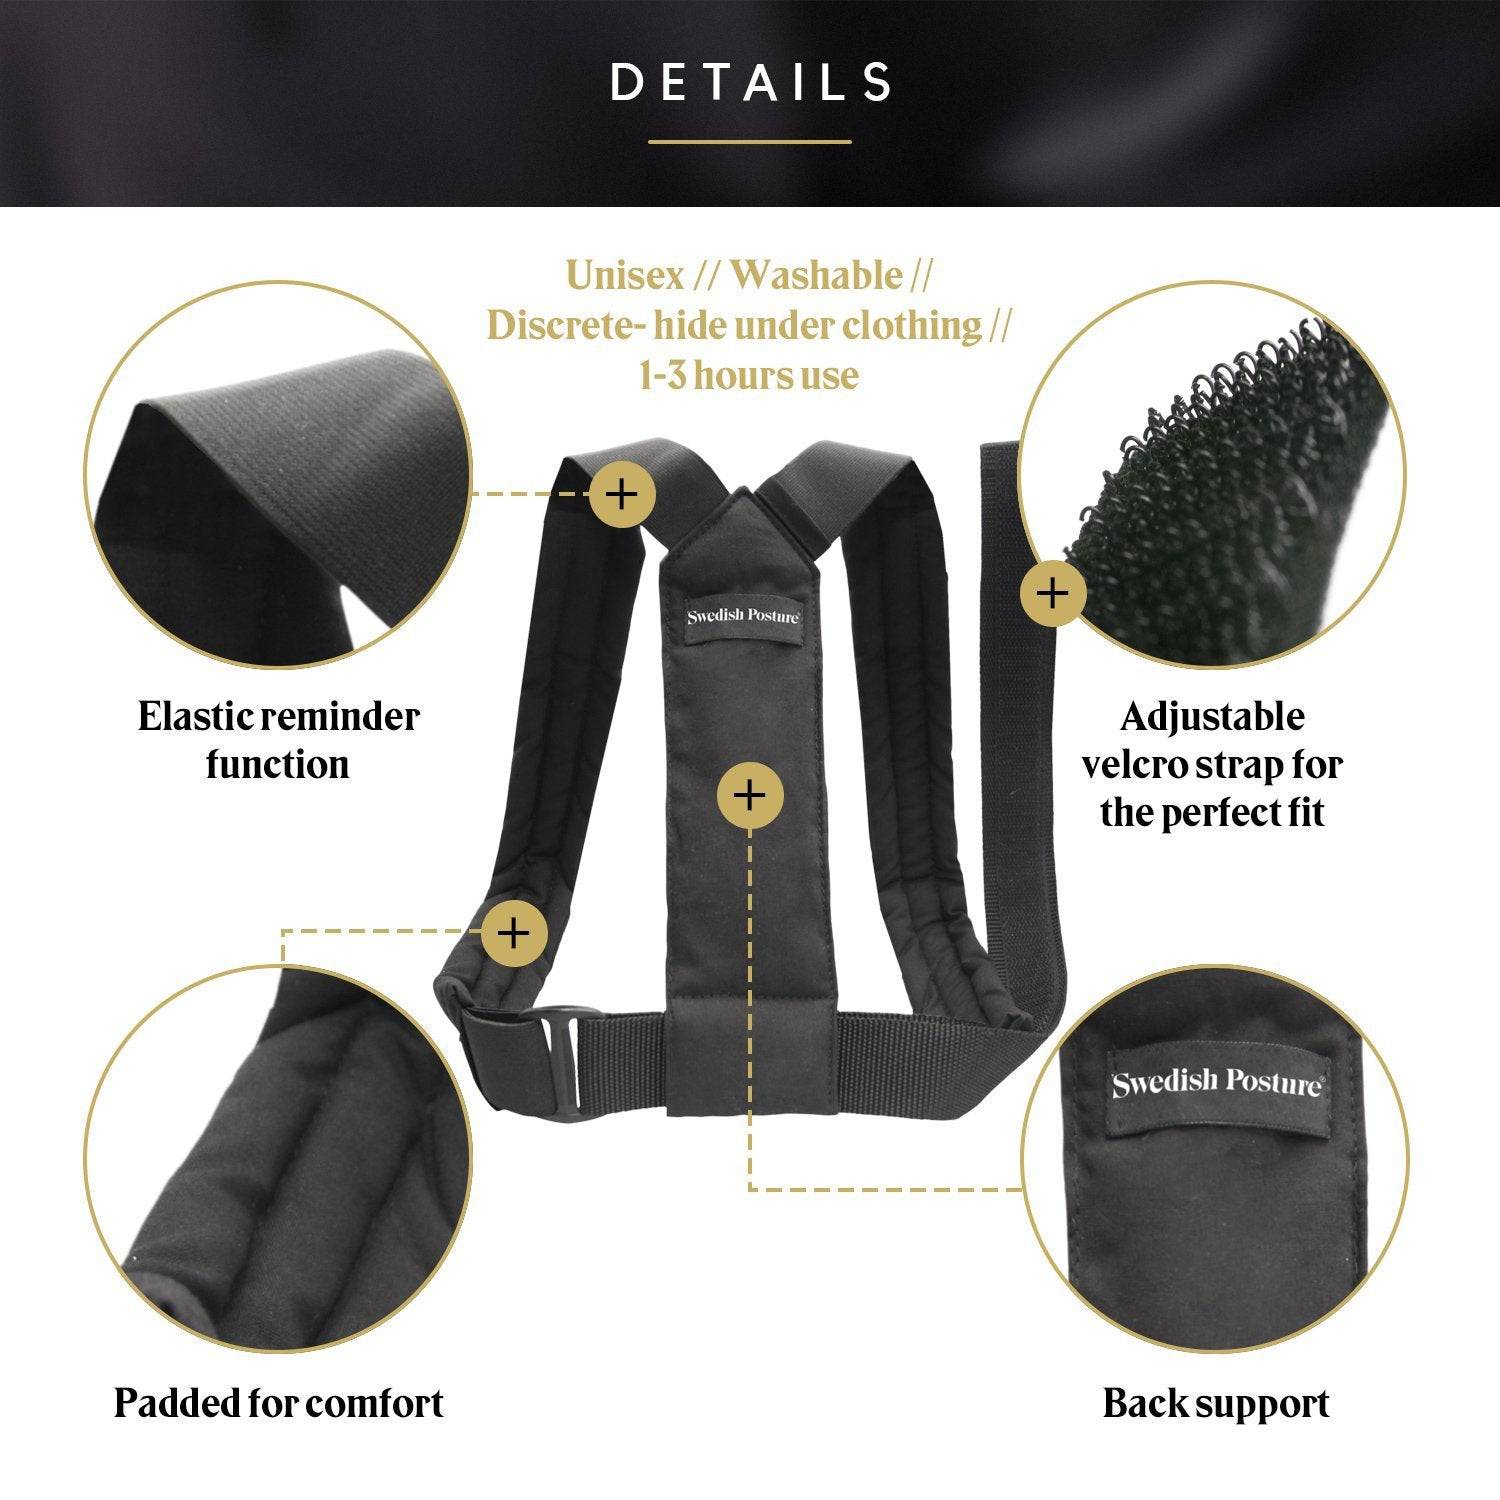  Posture Corrector For Men And Women, Comfortable